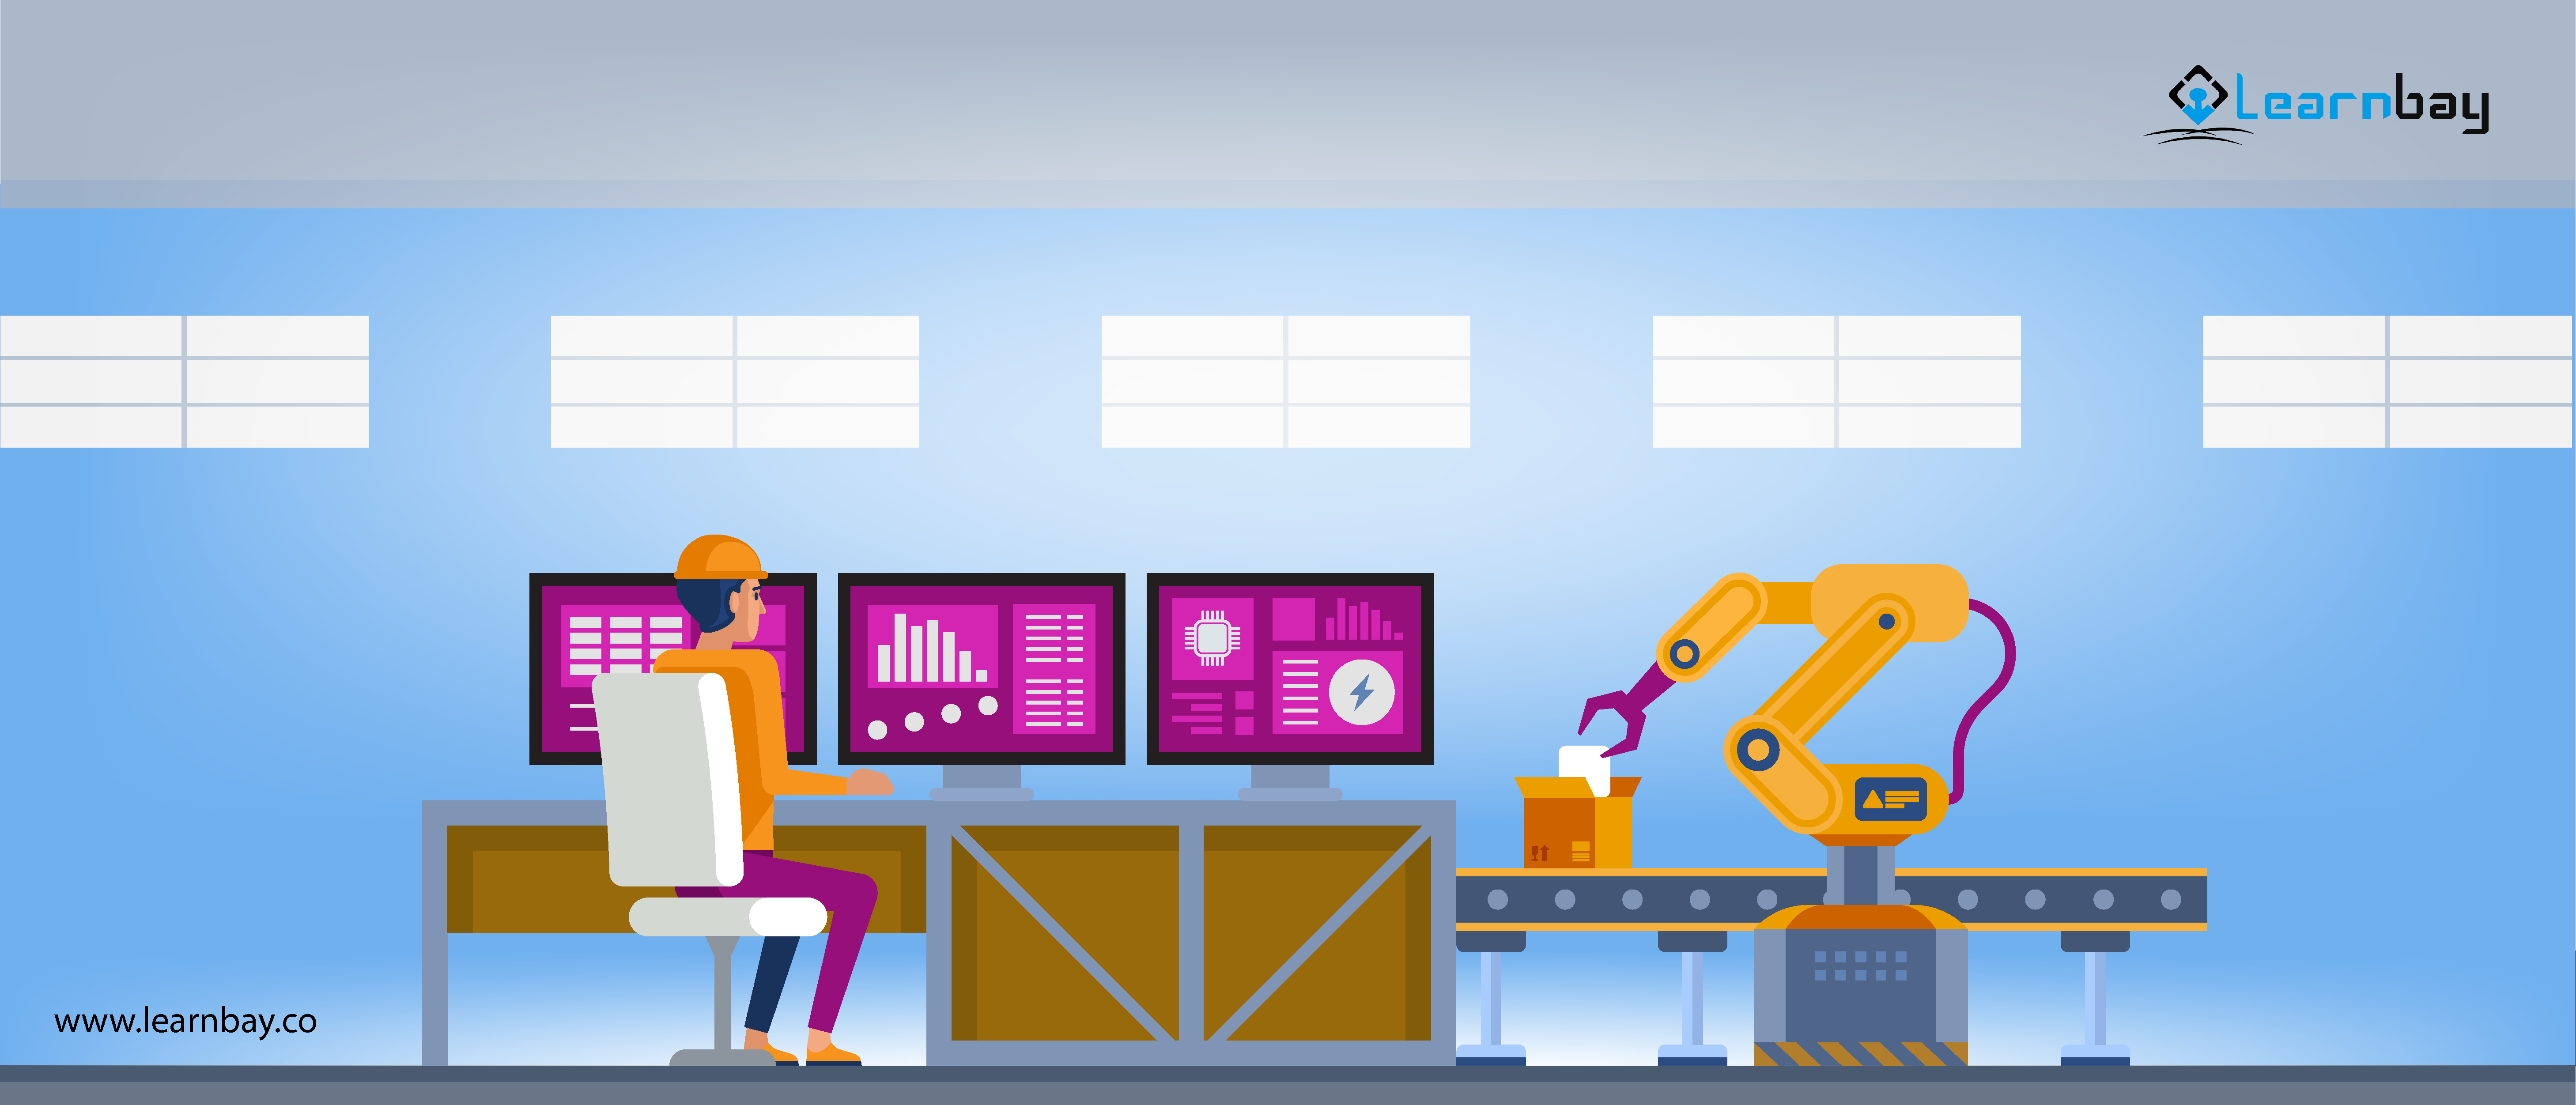 An illustration shows a guy sitting in a chair in front of three screens while a robotic machine packs a box in an accelerating tray.